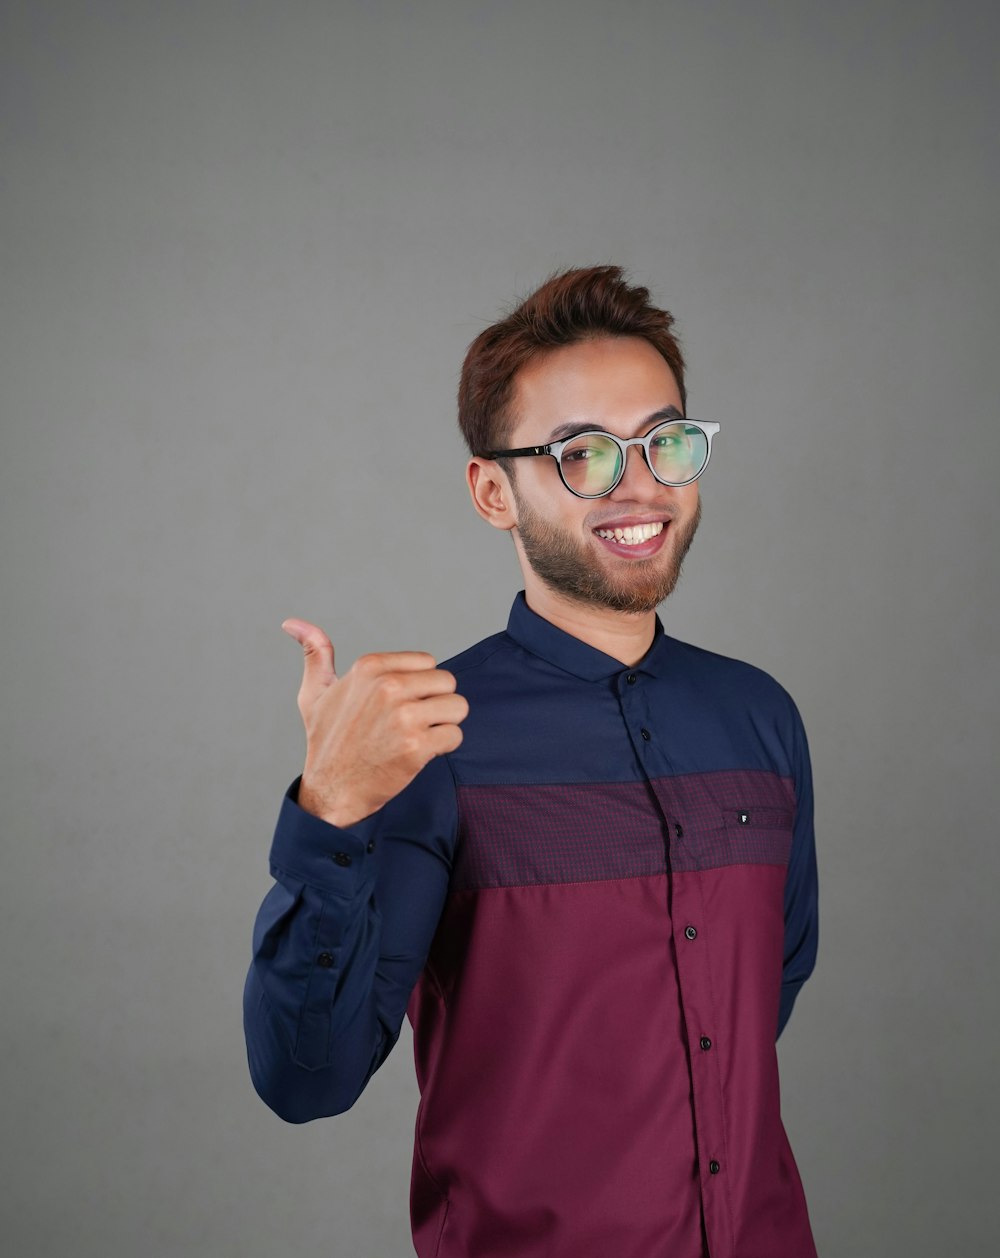 a man wearing glasses giving a thumbs up